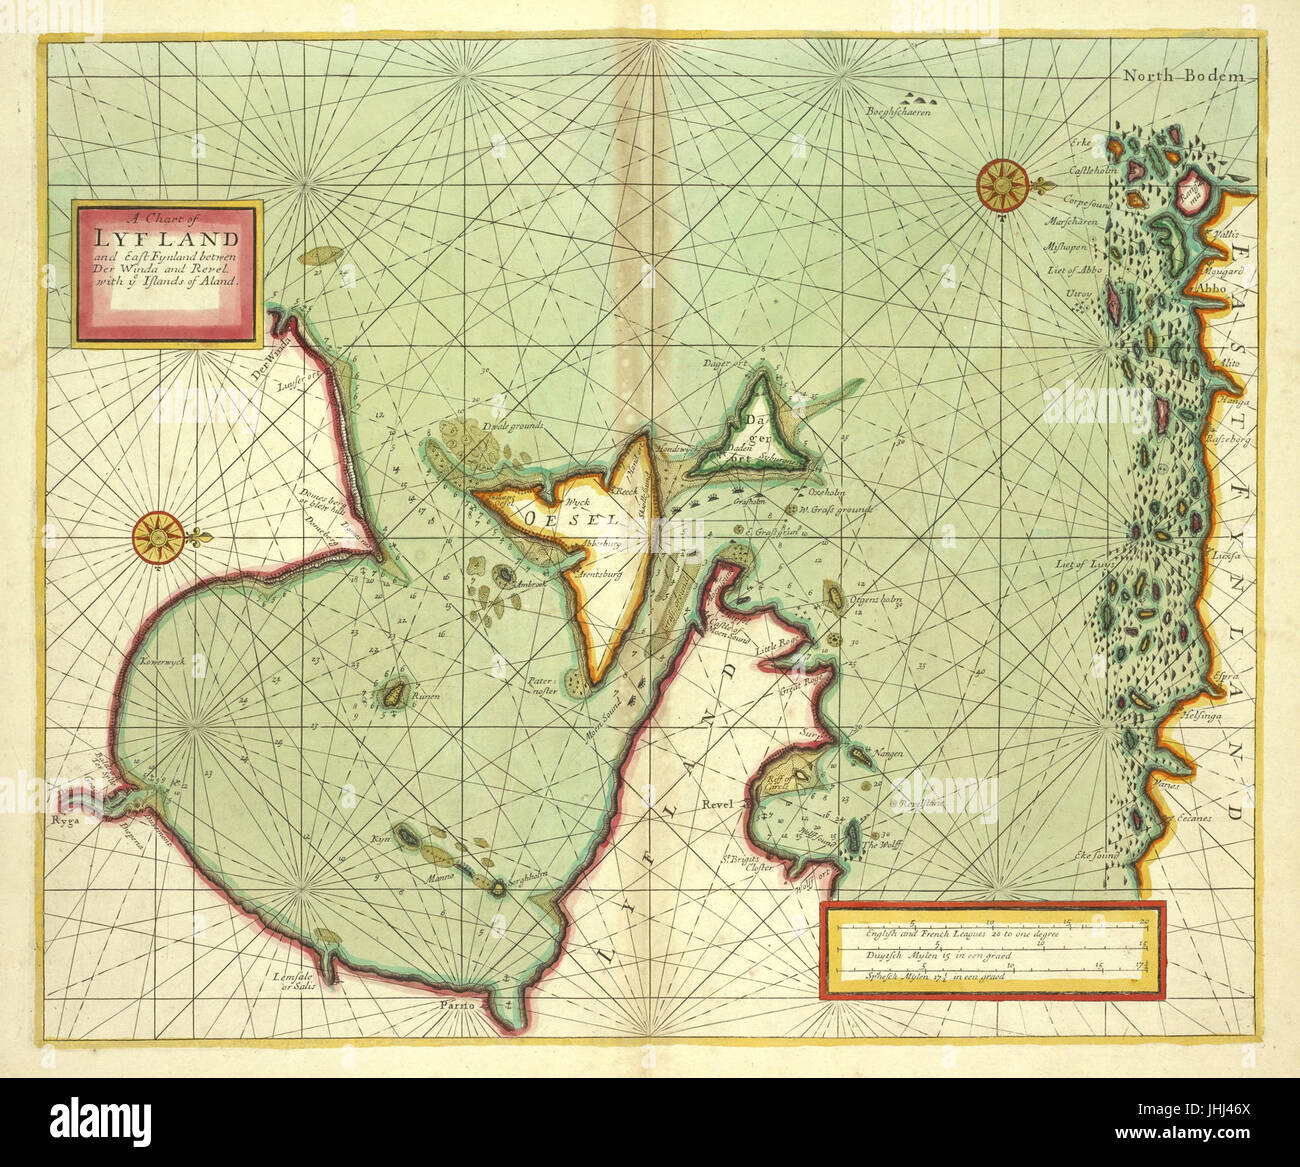 A chart of LYF LAND and East Fynland between Der Winda and Revel with Islands of Aland (NYPL b13909432-1640729) Stock Photo